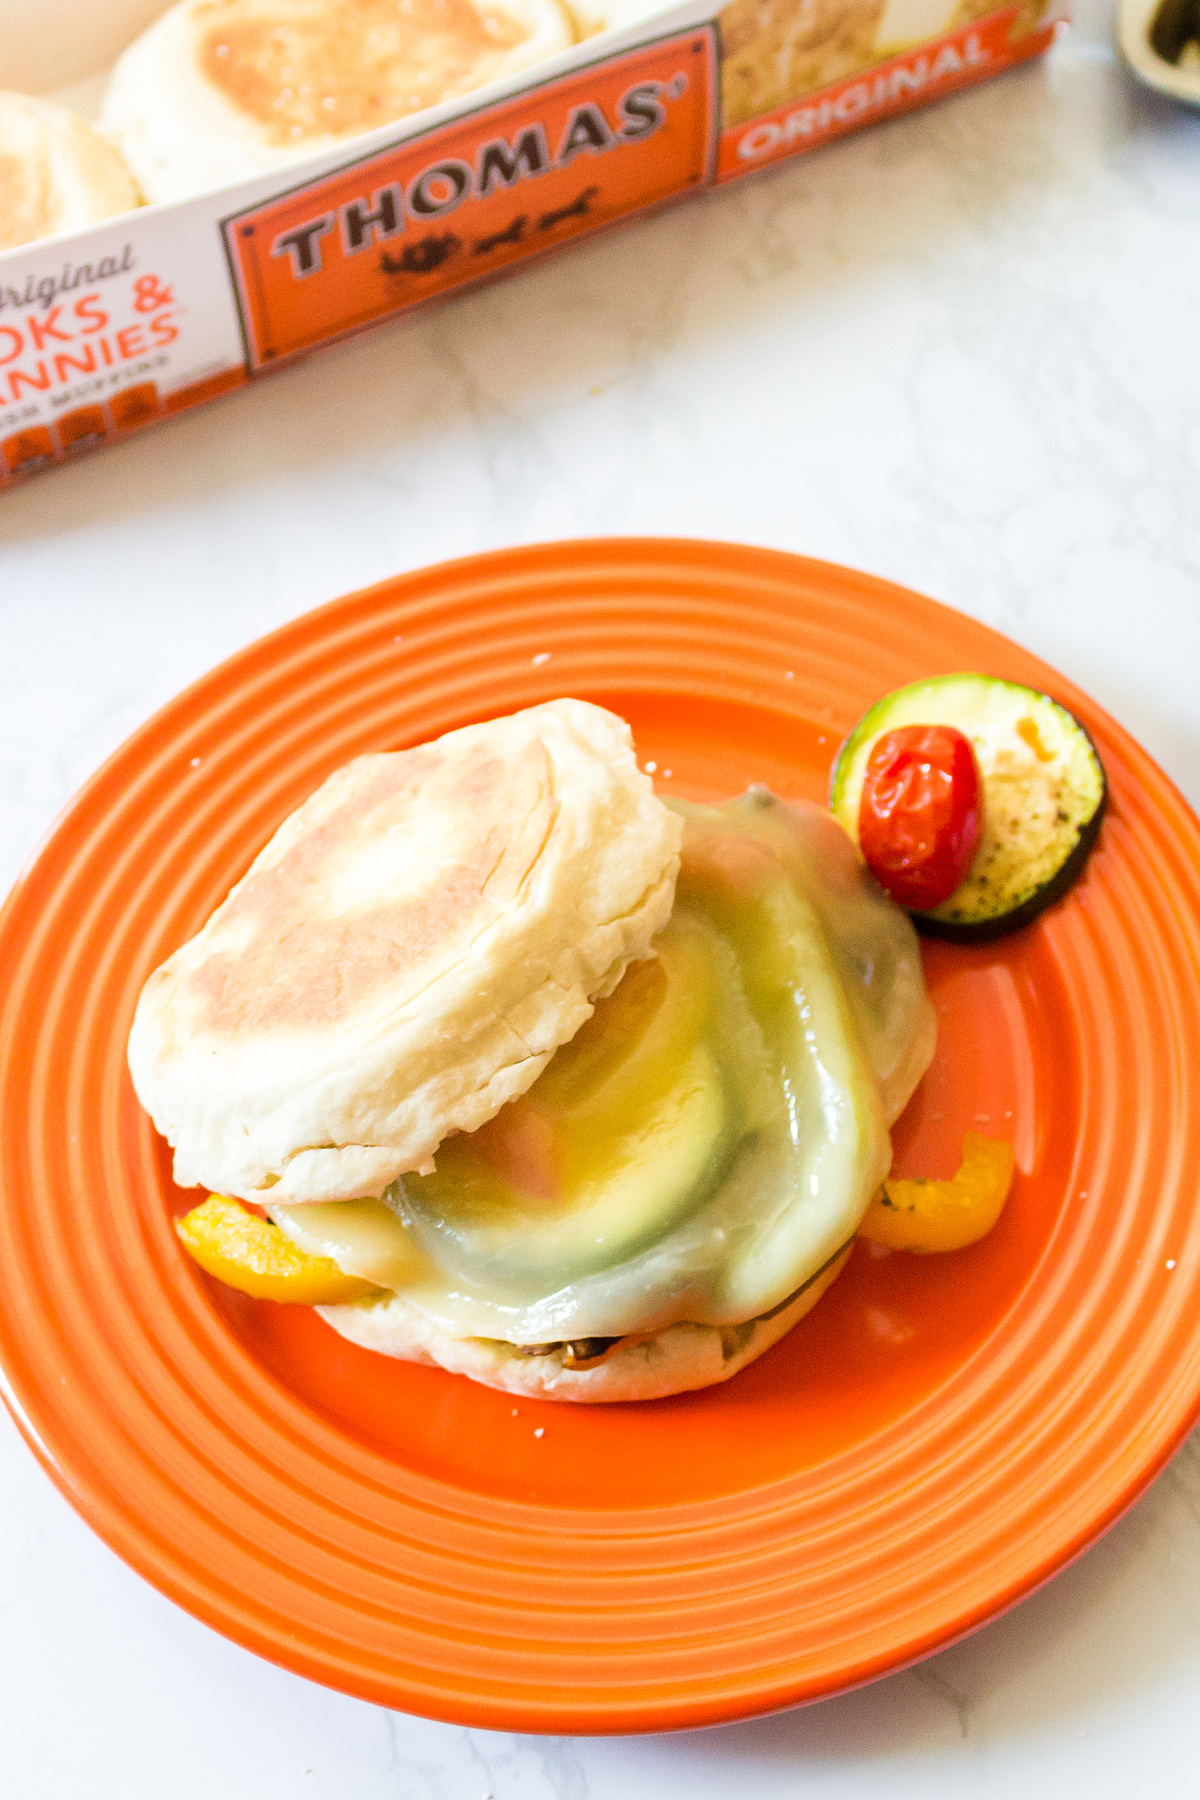 A veggie sandwich with melted cheese on a English muffin, served on an orange plate with a side of cherry tomatoes and zucchini slices.